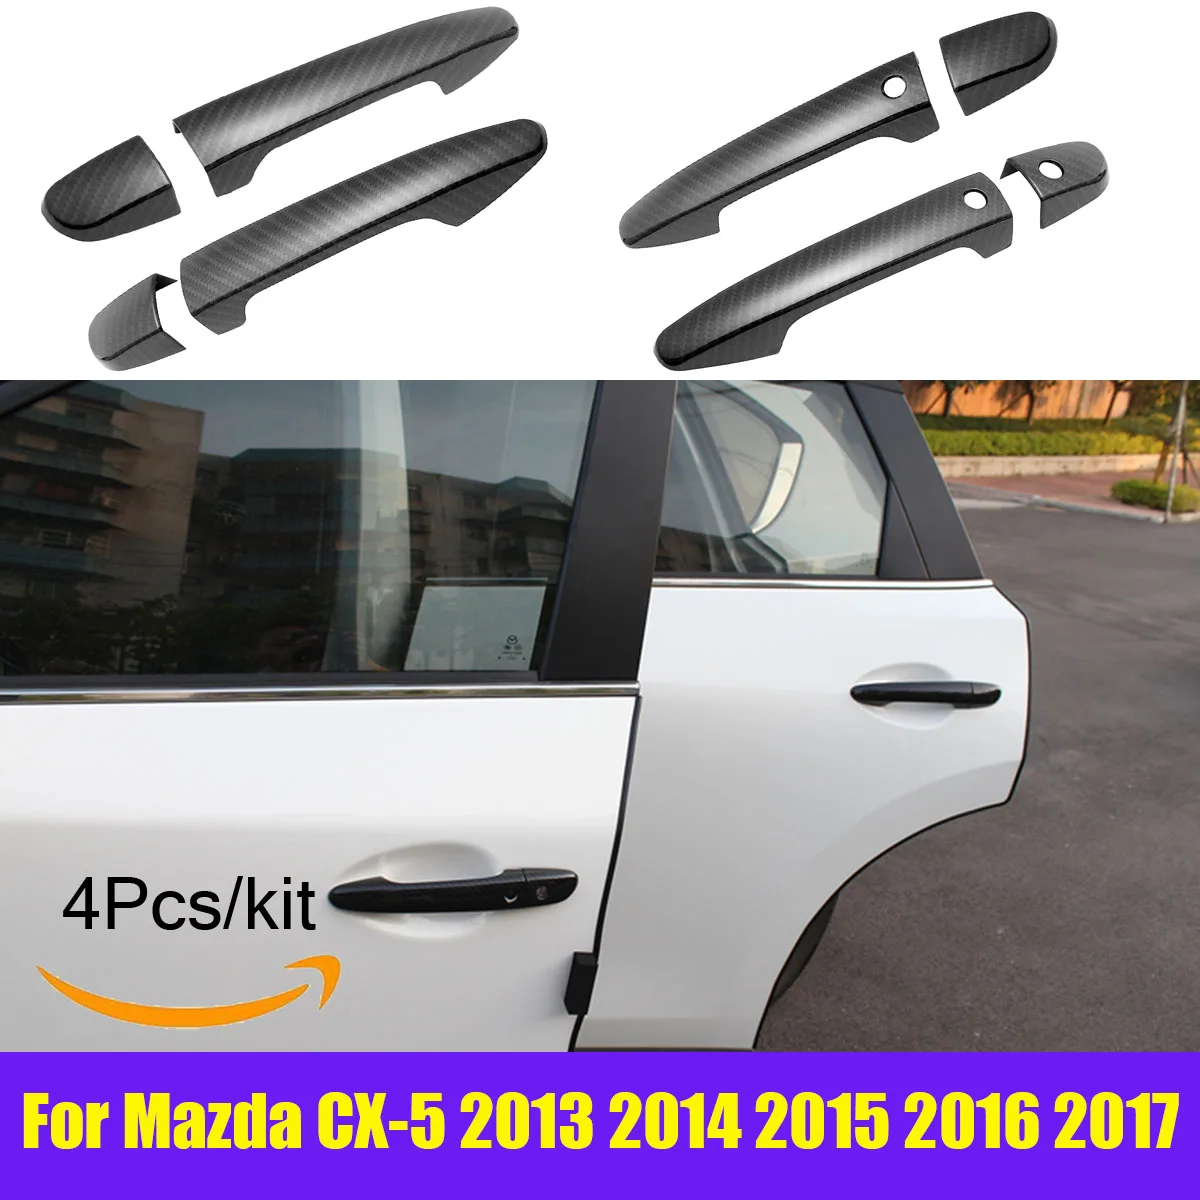 For Mazda CX-5 2014 2015 2016 Door Handle Cover Trim with 2 smart keyhole